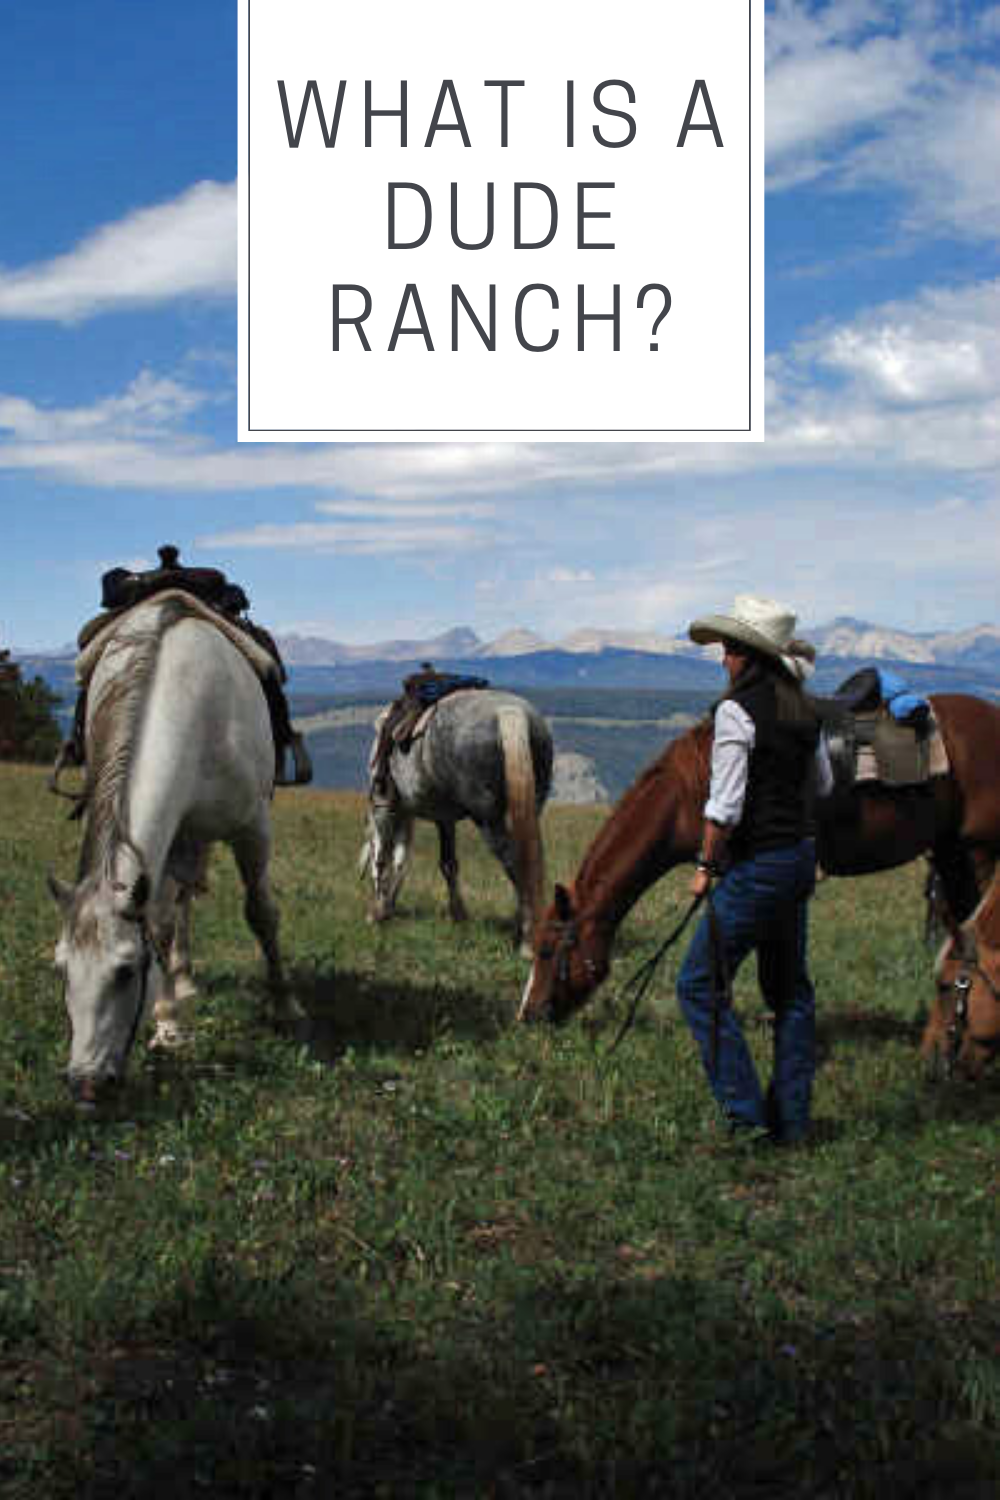 What is a guest ranch